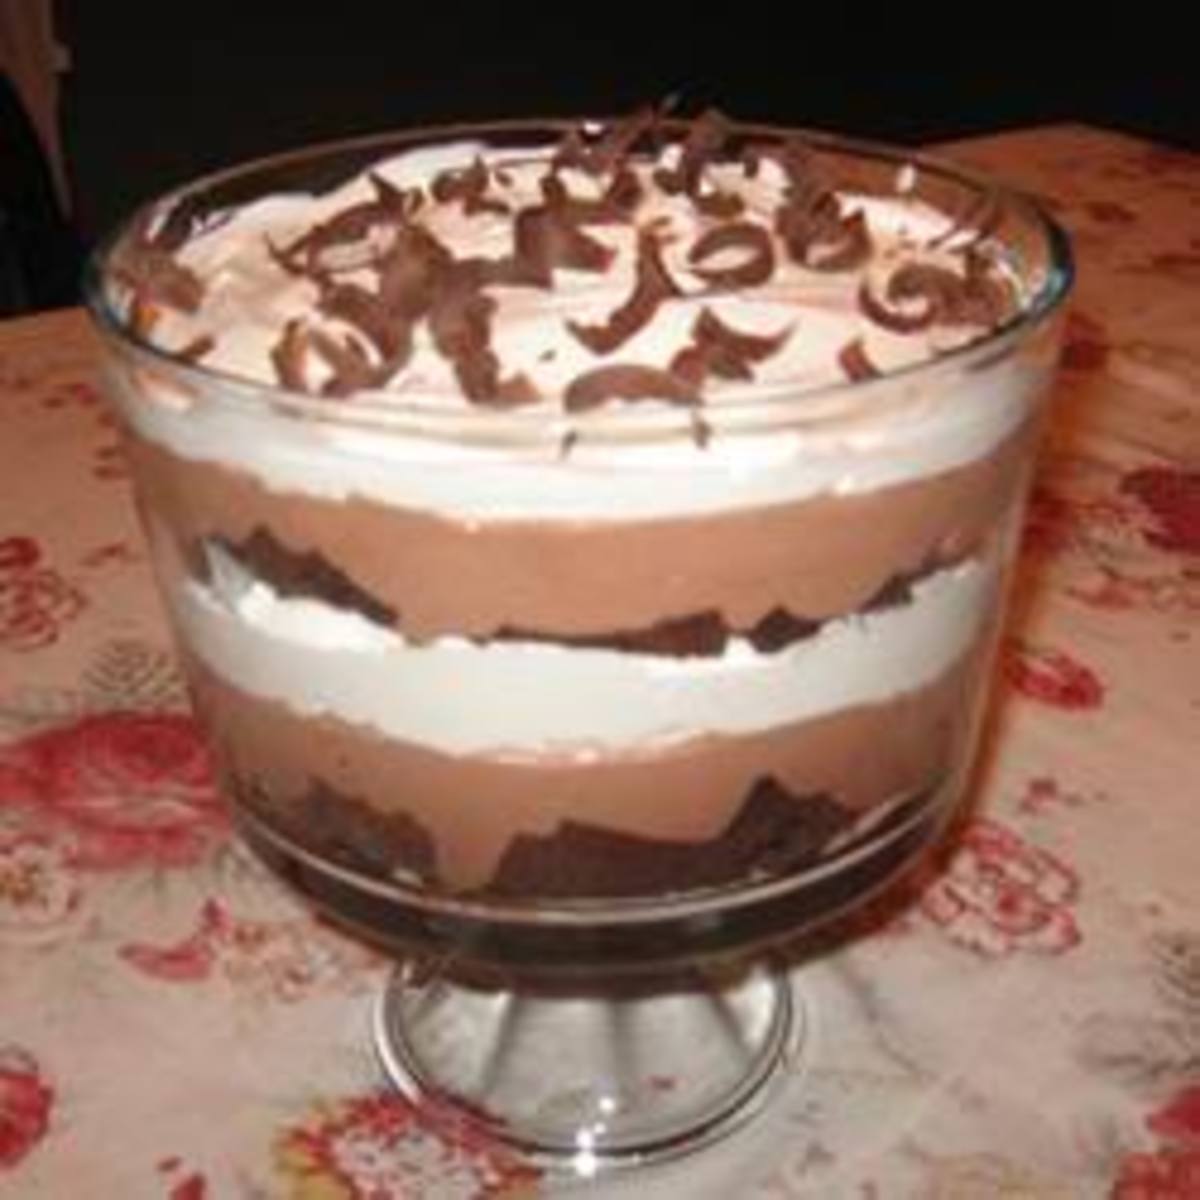 Easy, yummy Chocolate torte trifle!  Note that I have used the easy no bake Oreo crumbs crust recipe at the bottom of this torte.